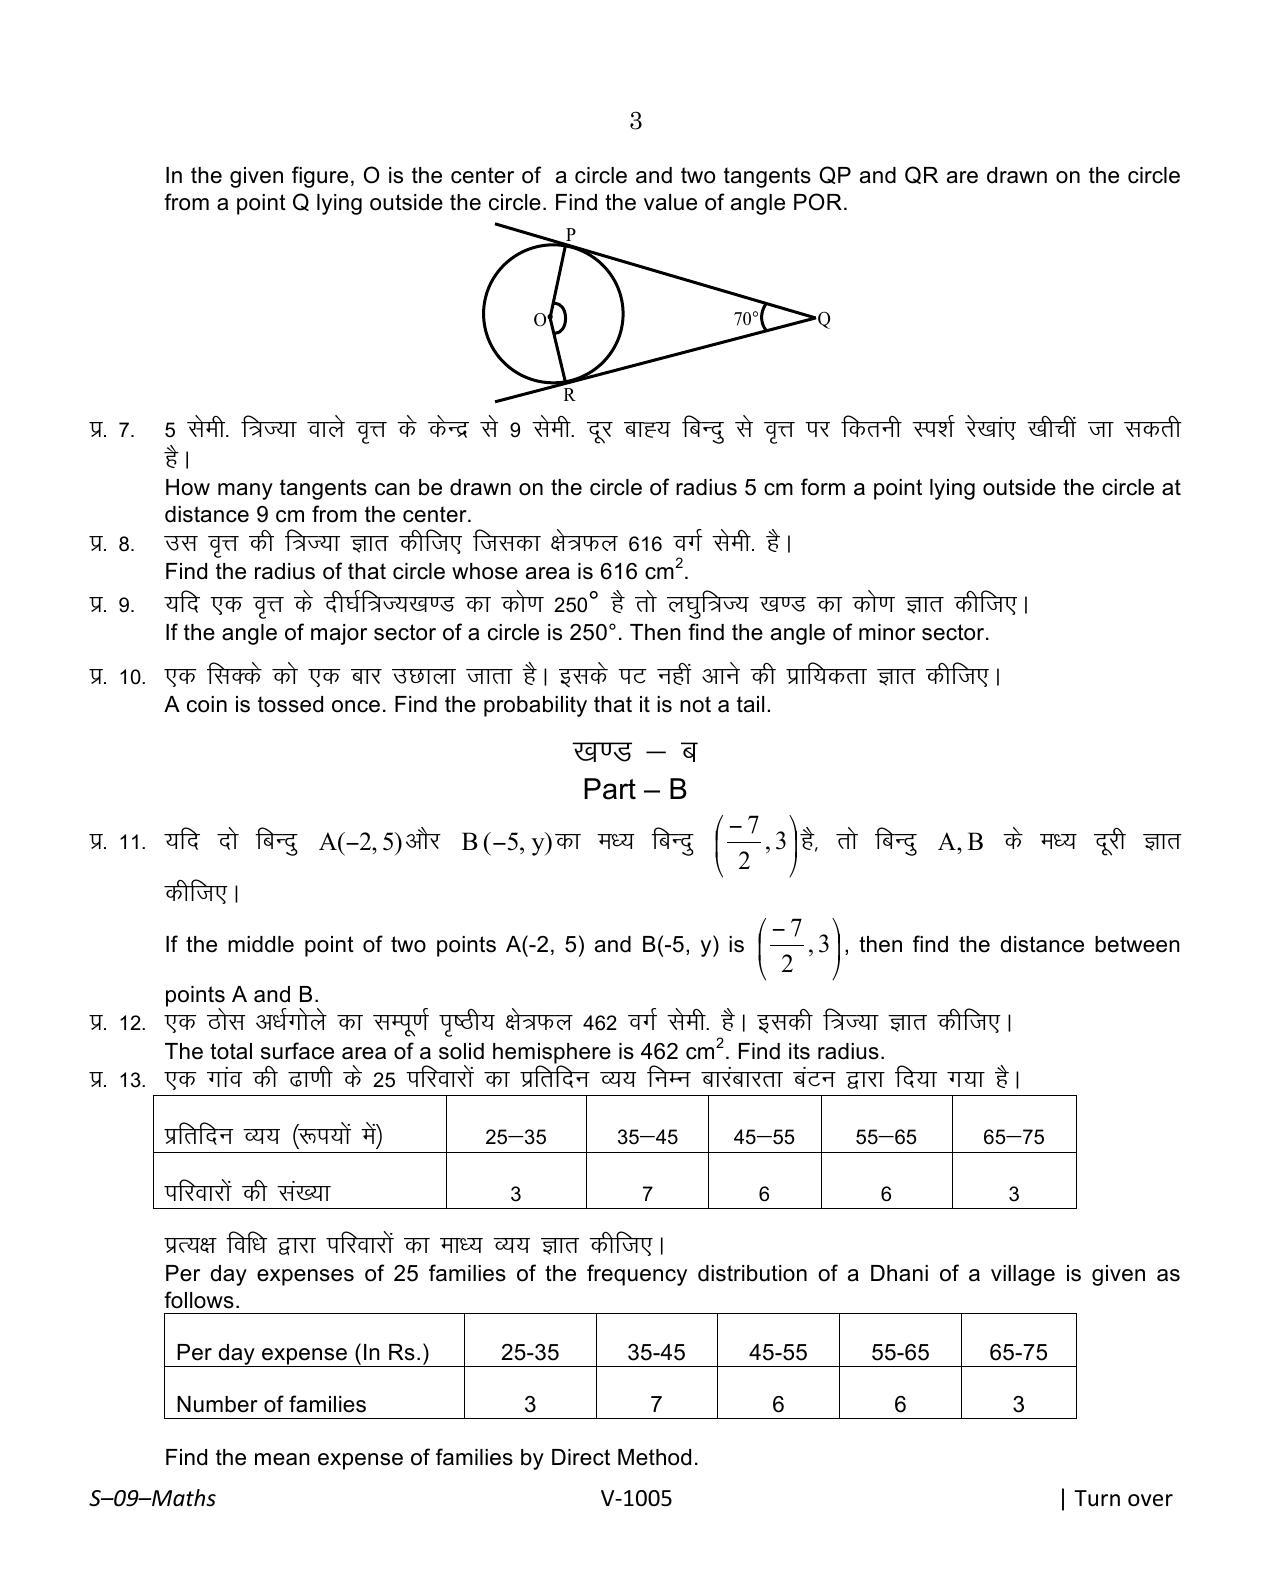 RBSE Class 10 Mathematics 2016 Question Paper - Page 3